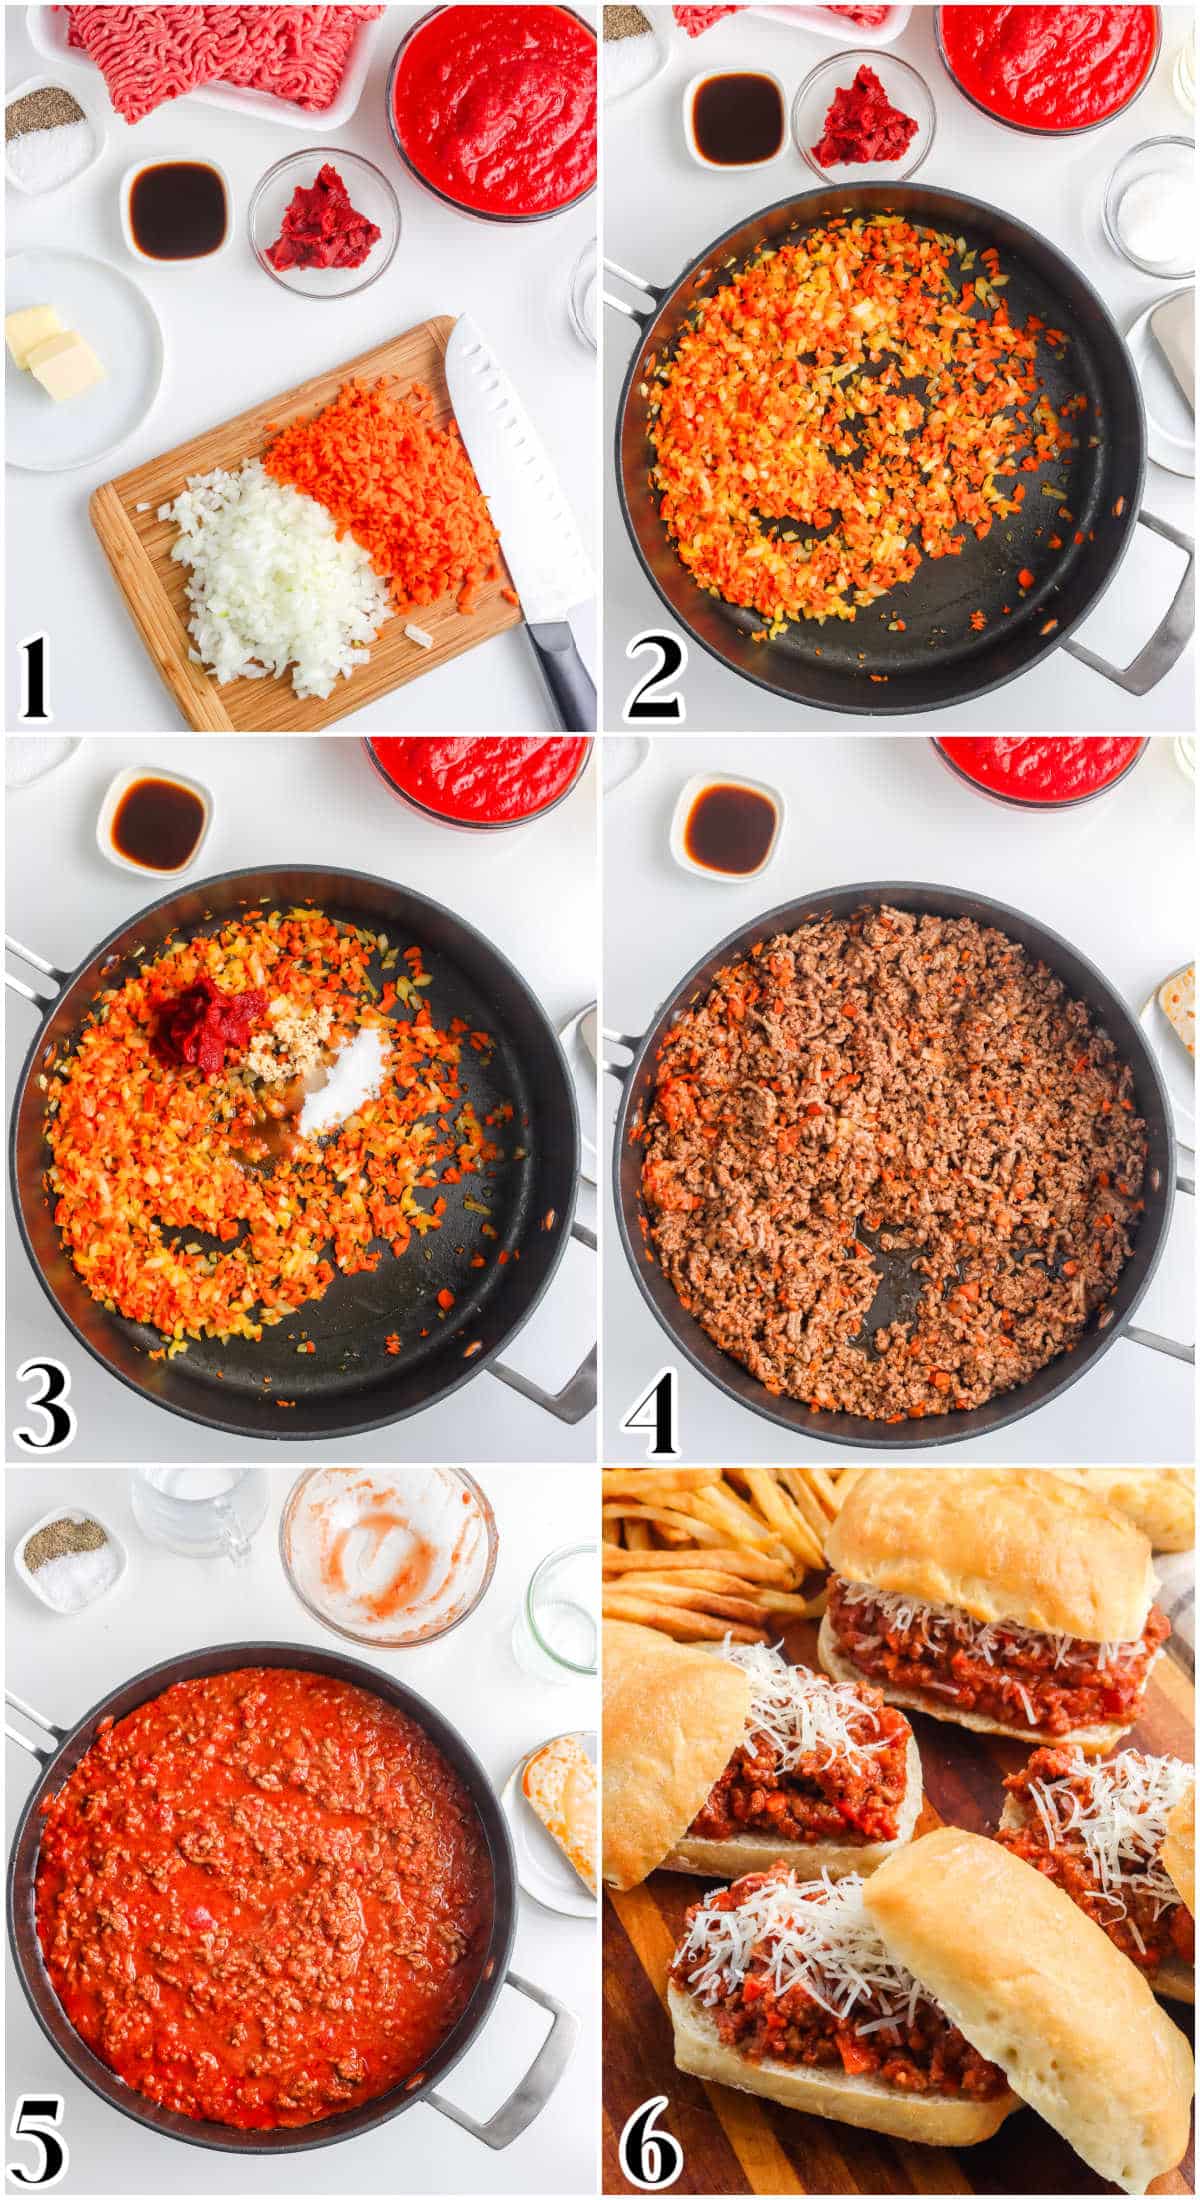 A picture collage showing how to make this recipe, from prepping the ingredients to placing the meat mixture on ciabatta rolls.